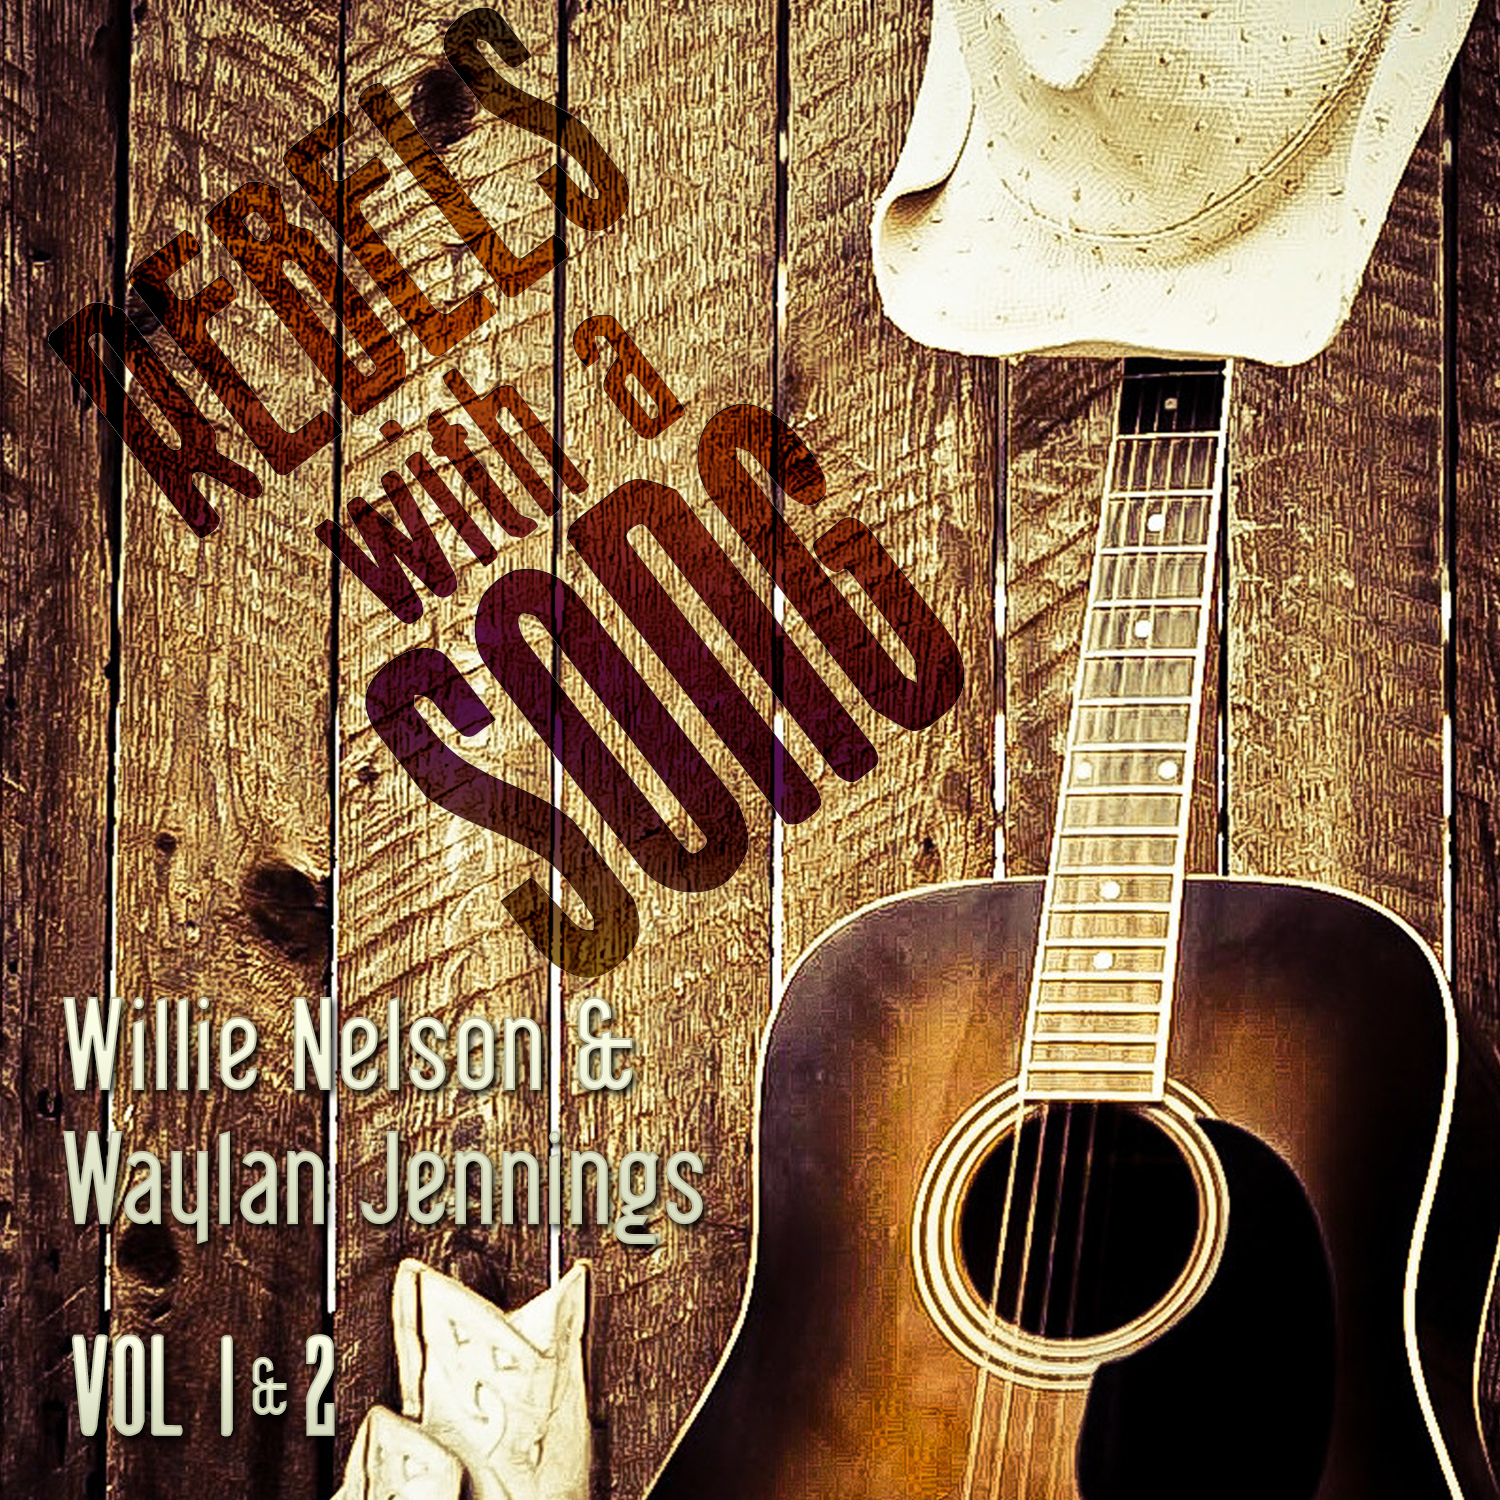 Rebels with a Song: Vol 1 & 2